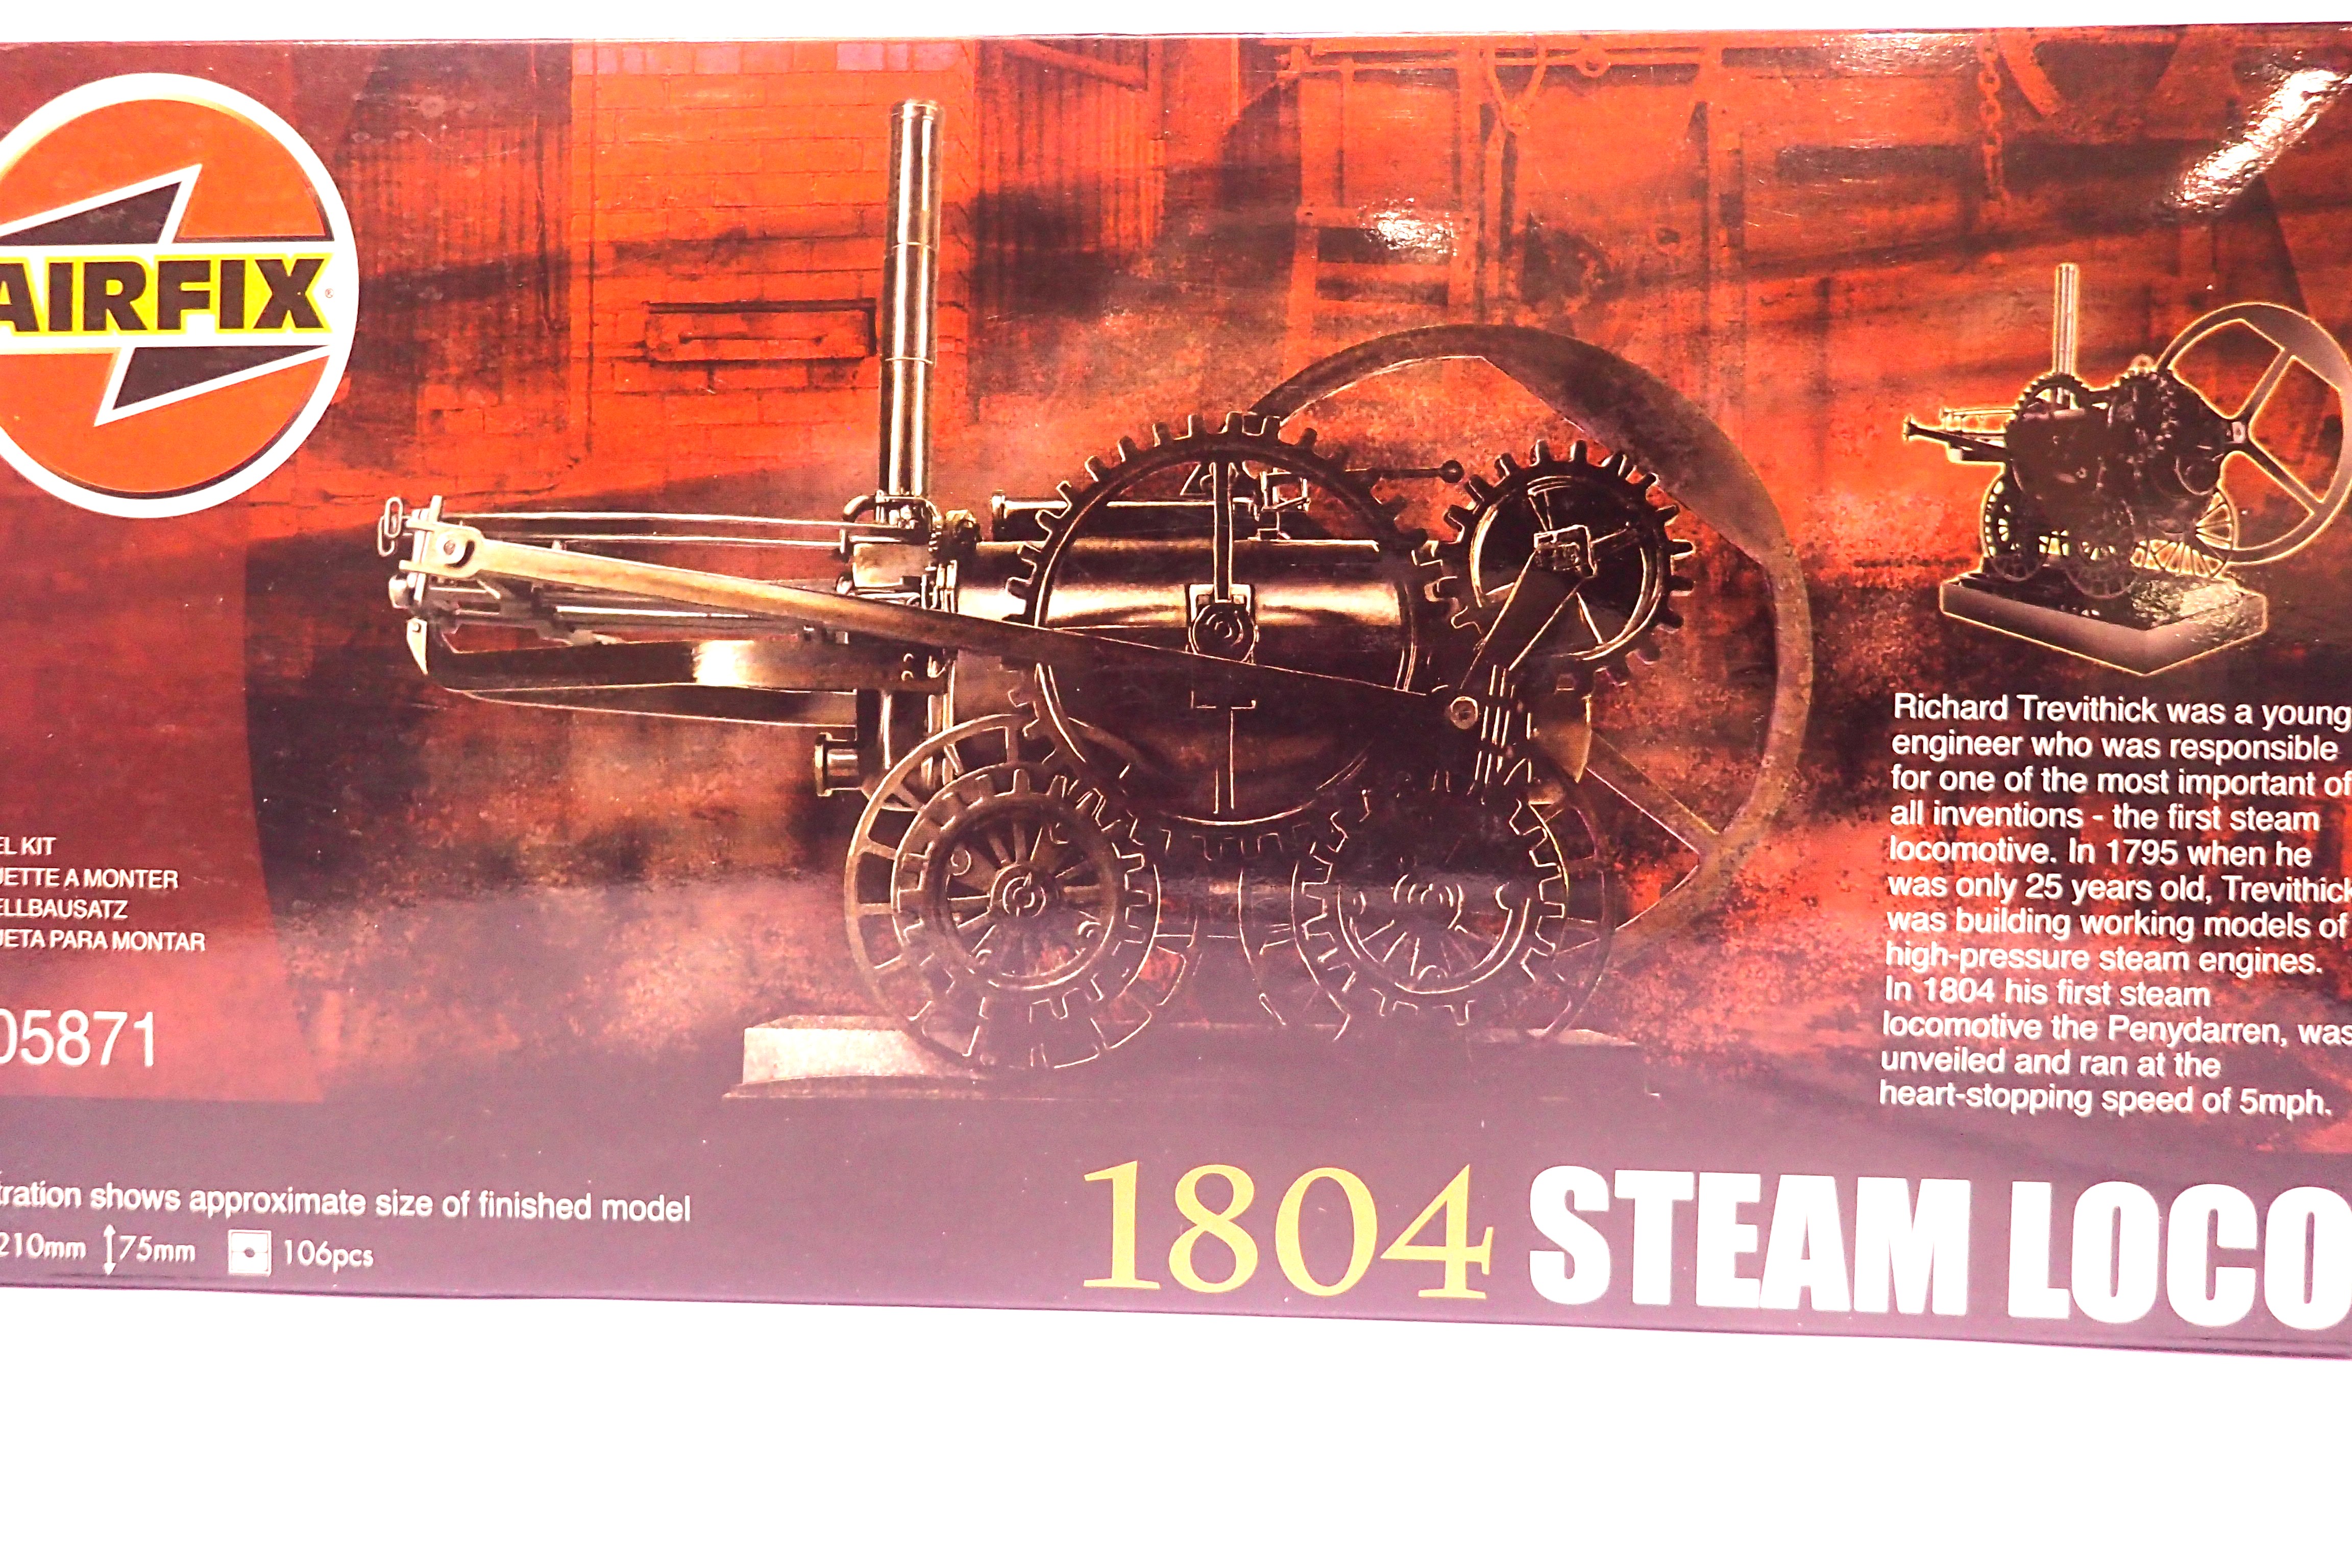 Airfix AO5871 1804 steam loco plastic kit. P&P Group 1 (£14+VAT for the first lot and £1+VAT for